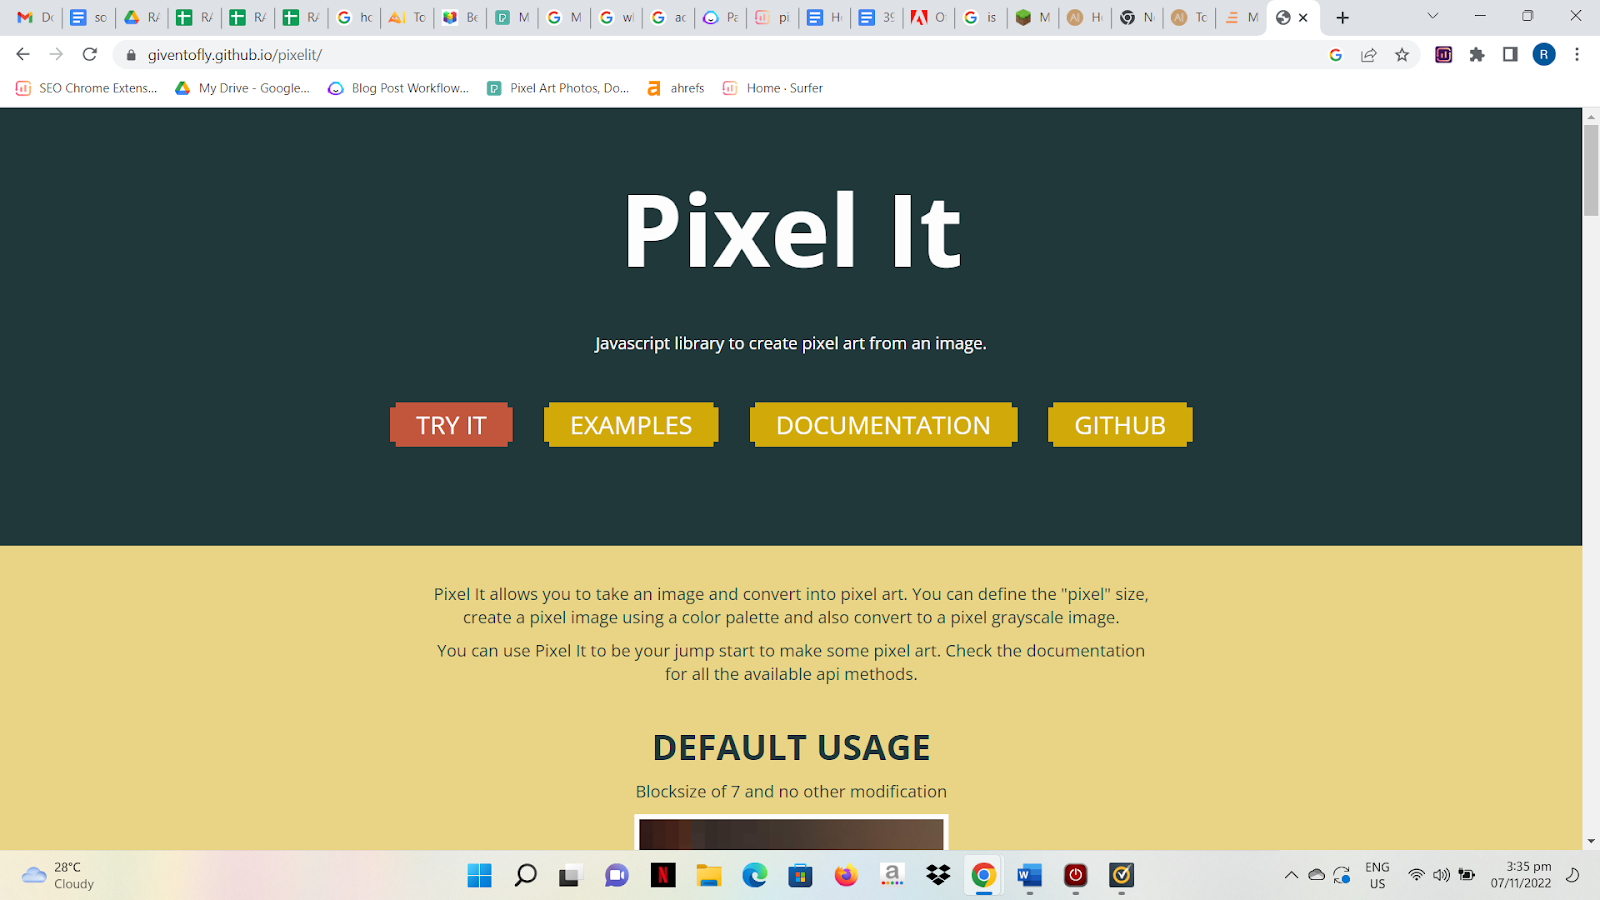 Pixel It is a GitHub project that turns images into pixel art, using JavaScript. To use the quick default configuration, you'll need an image element and a canvas element with the id pixelit canvas. 